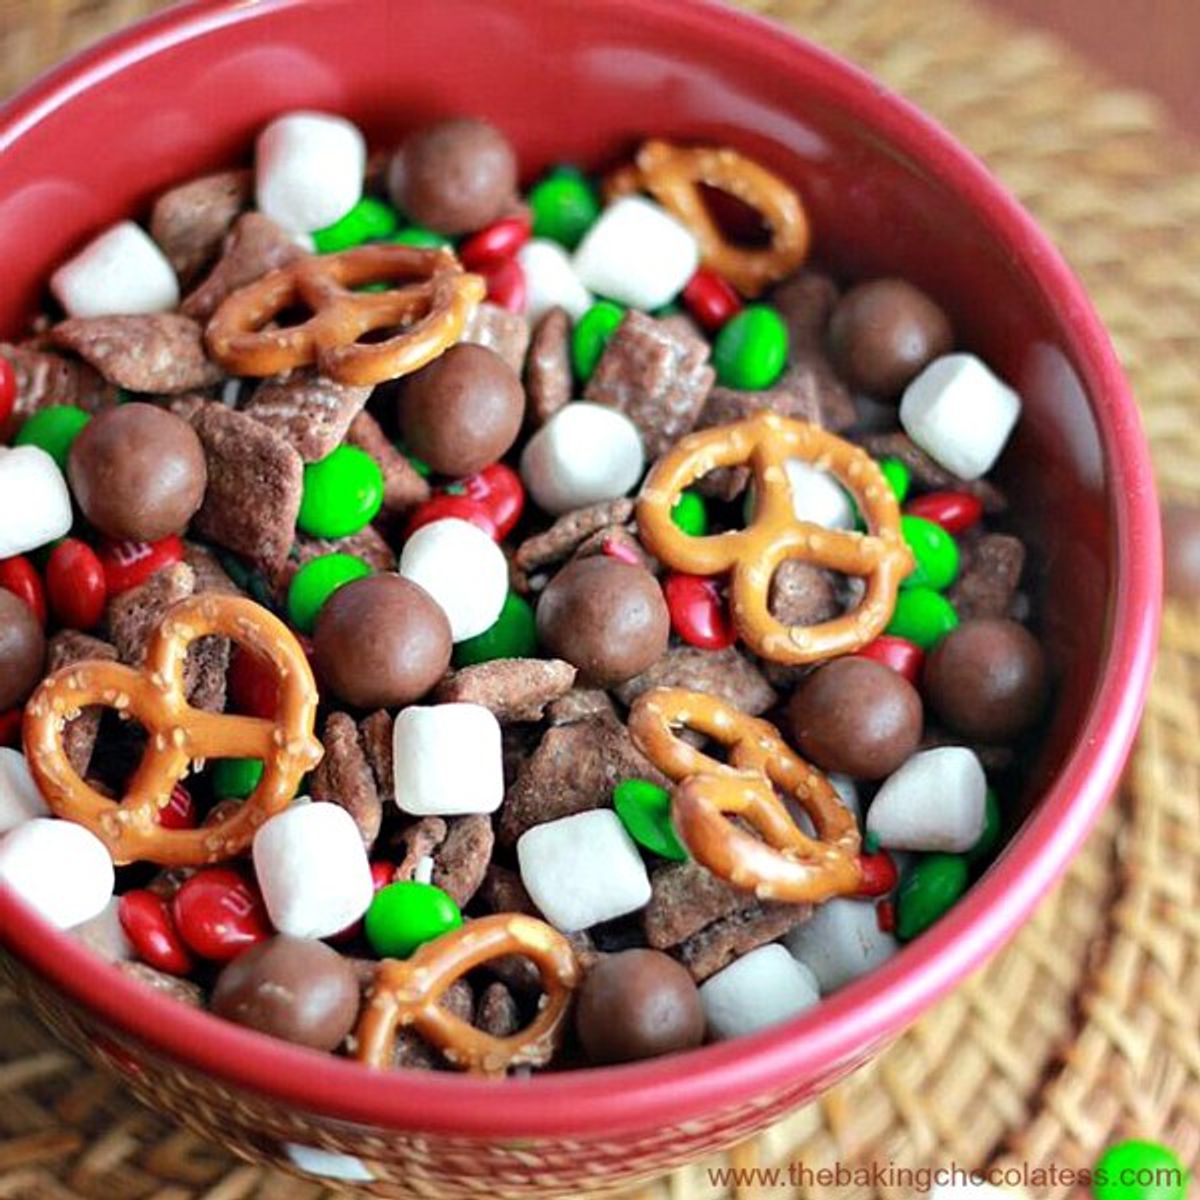 Top 5 Holiday Sweets You Can't Resist